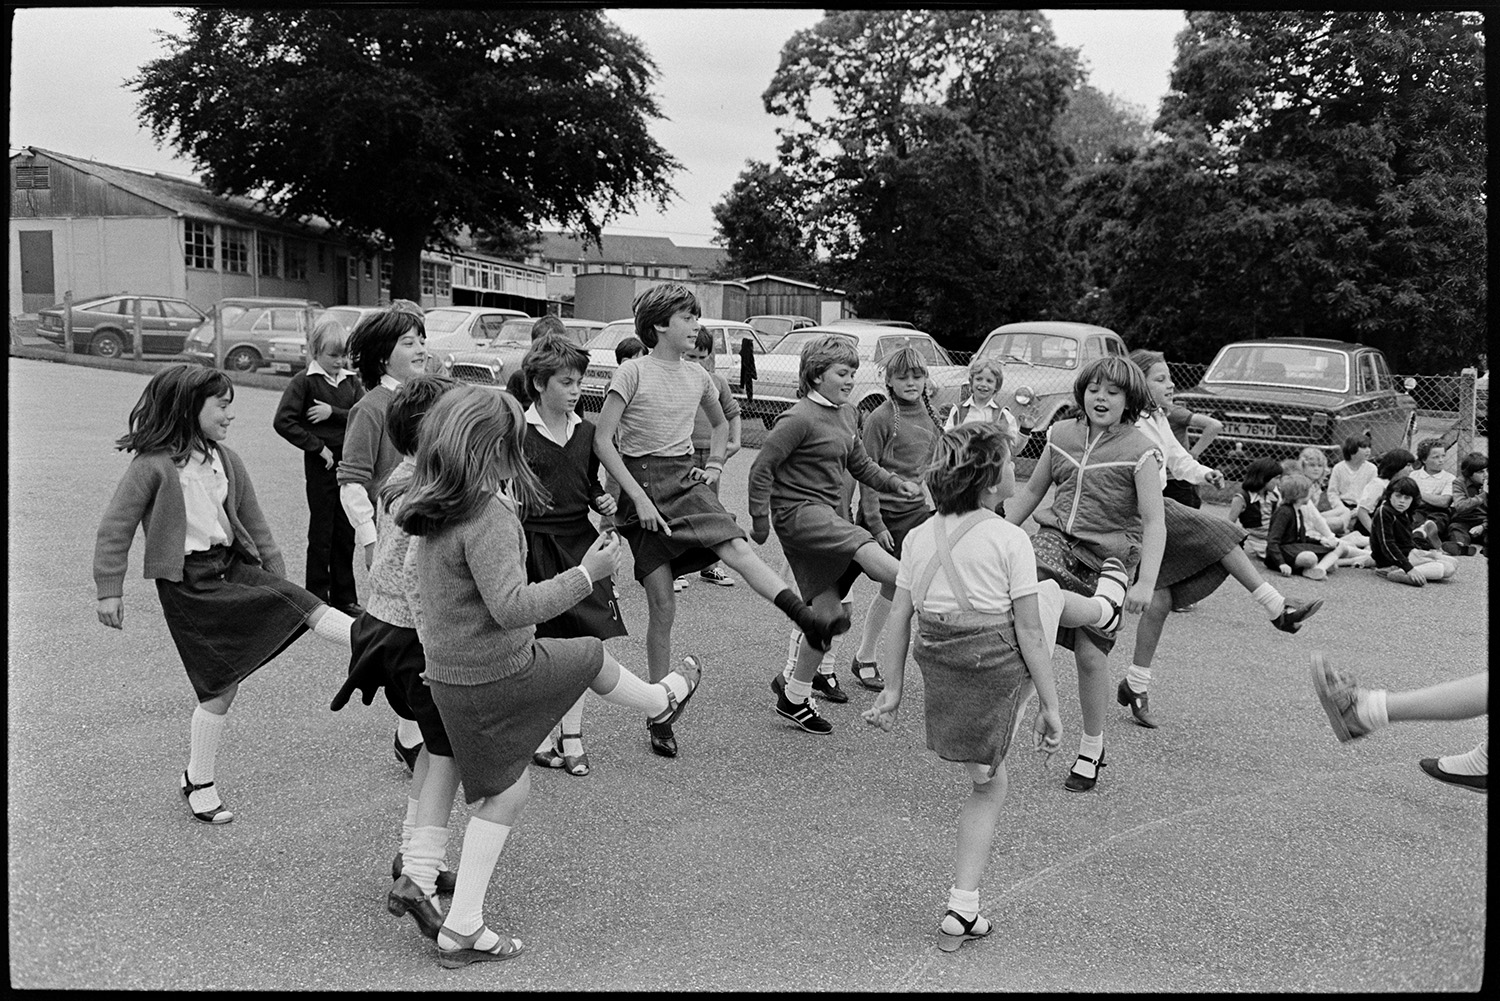 Schoolchildren singing, dancing with folk duo. 
[Schoolchildren dancing in a playground in Barnstaple, at a folk workshop run by the folk duo Sam Richards and Tish Richards. Cars are parked behind the playground and school buildings can be seen in the background.]